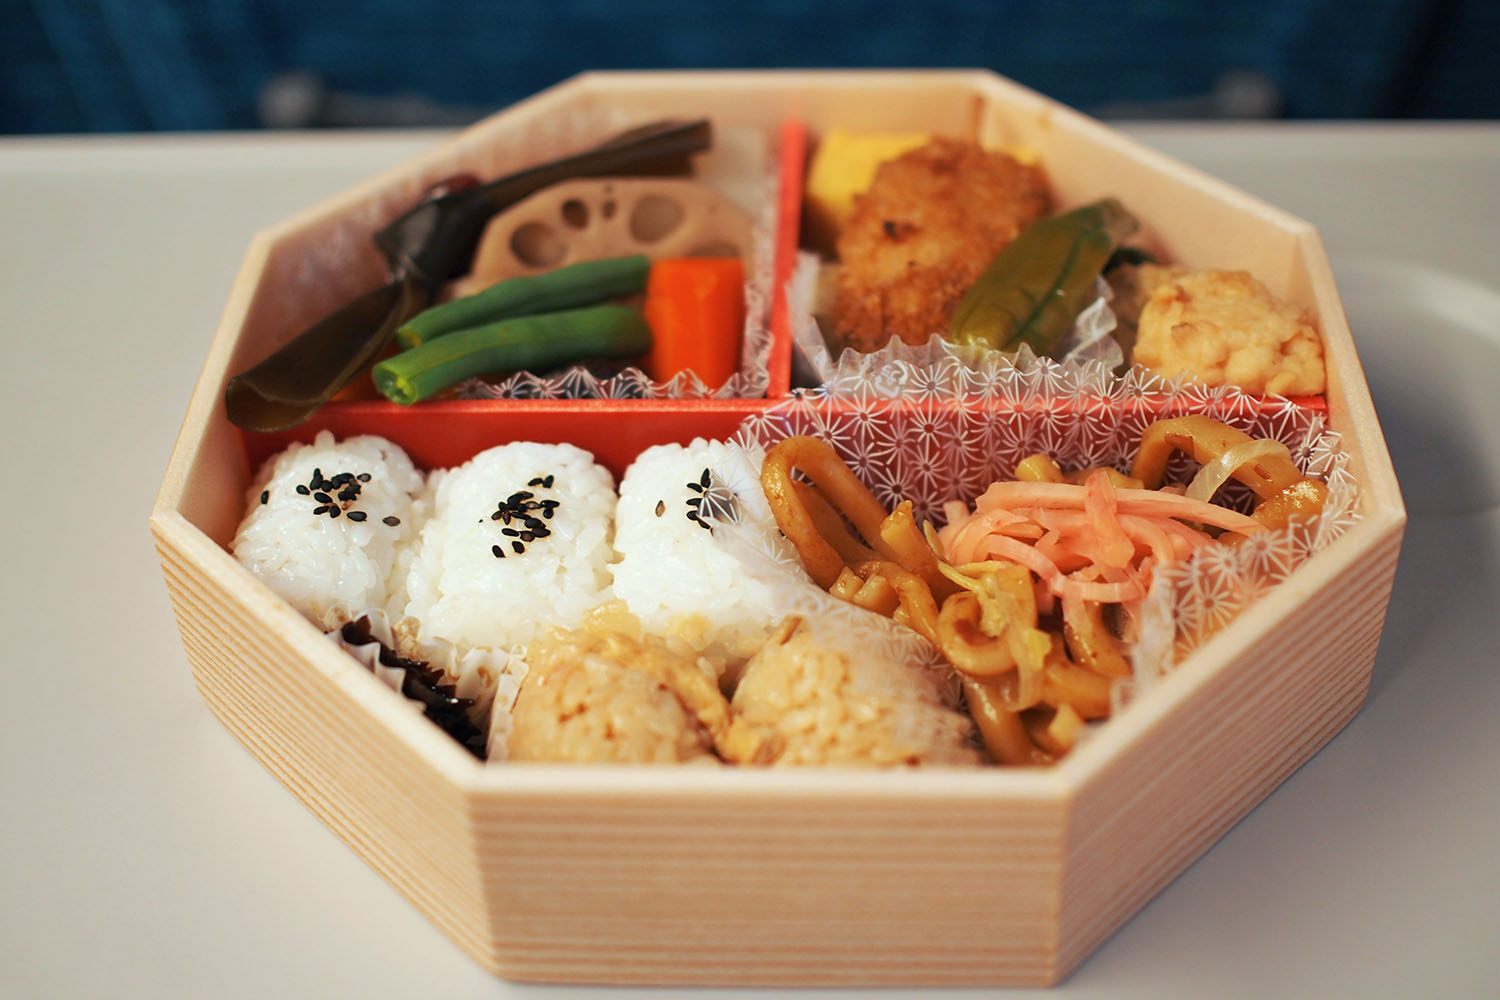 Ekiben: Enjoy the Long Journey With a Delicious Packed Meal